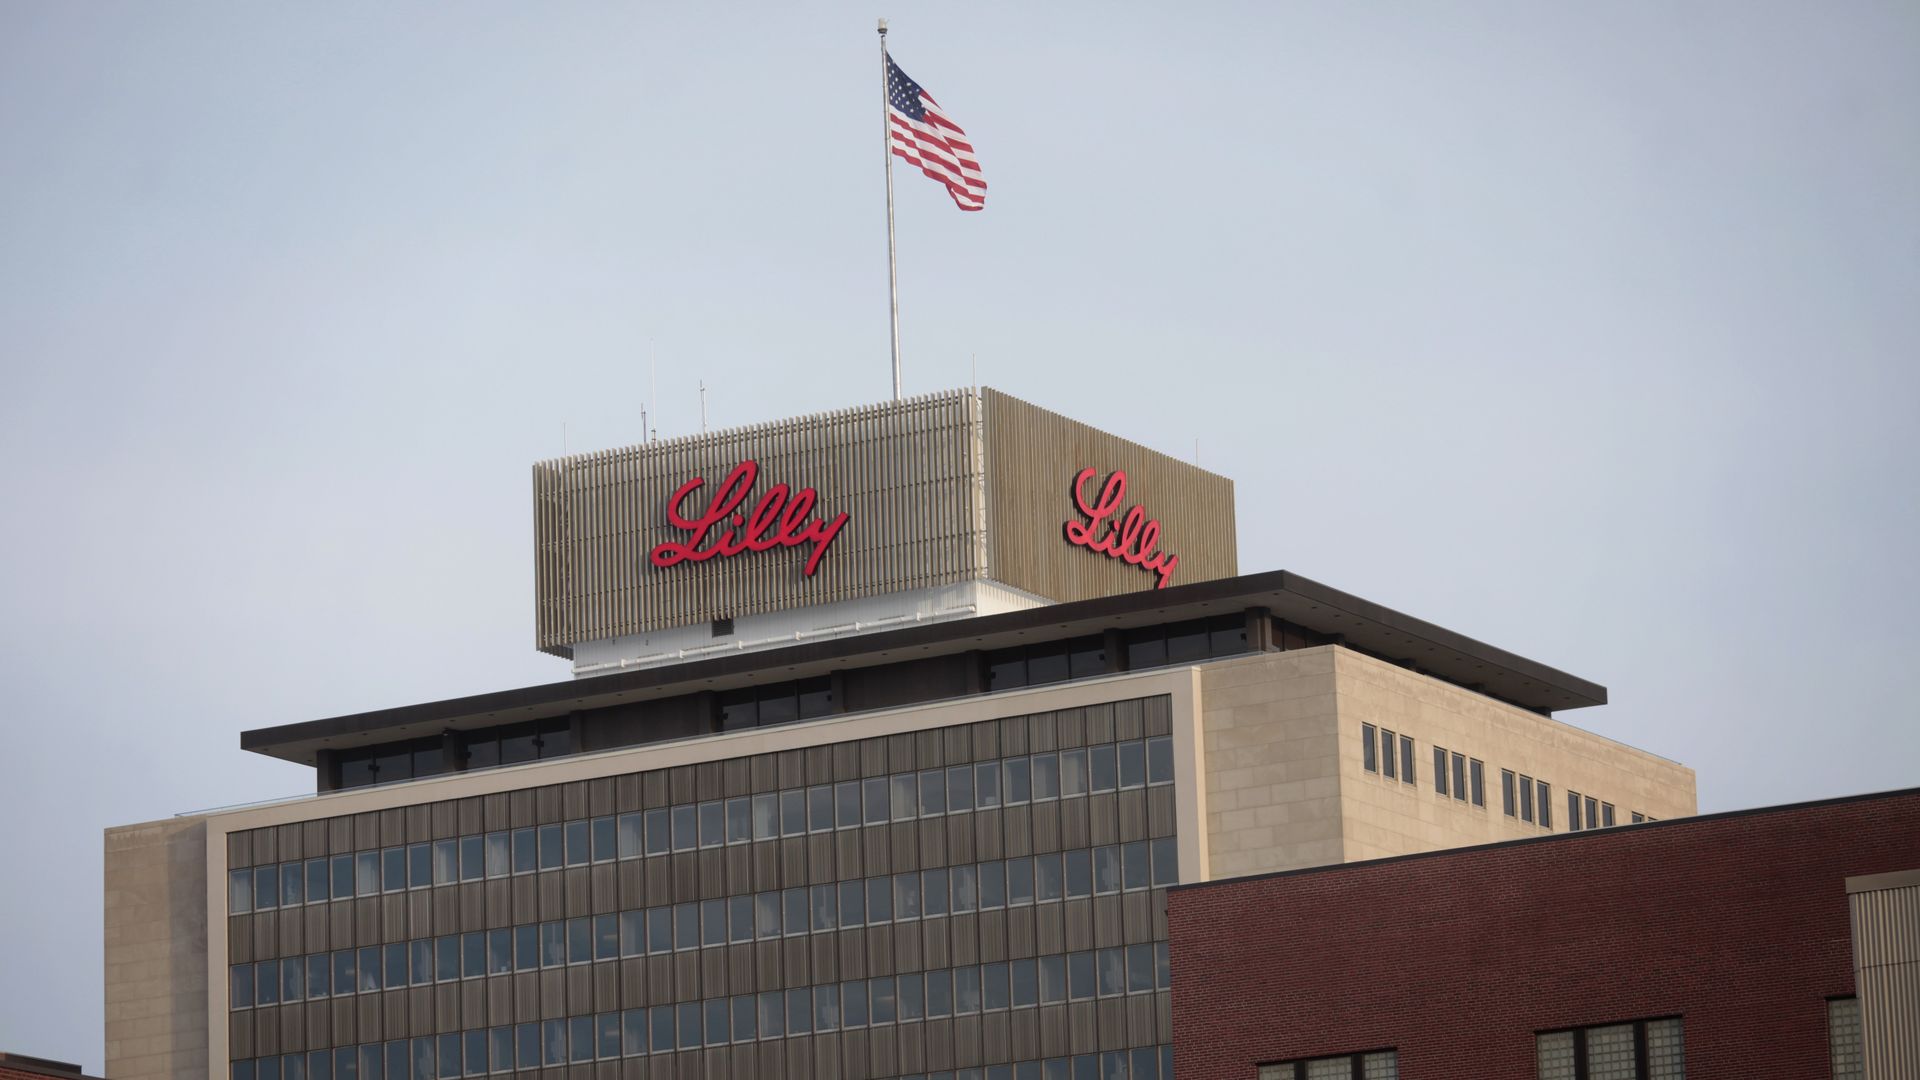 Eli Lilly corporate headquarters building with its red logo and an American flag.